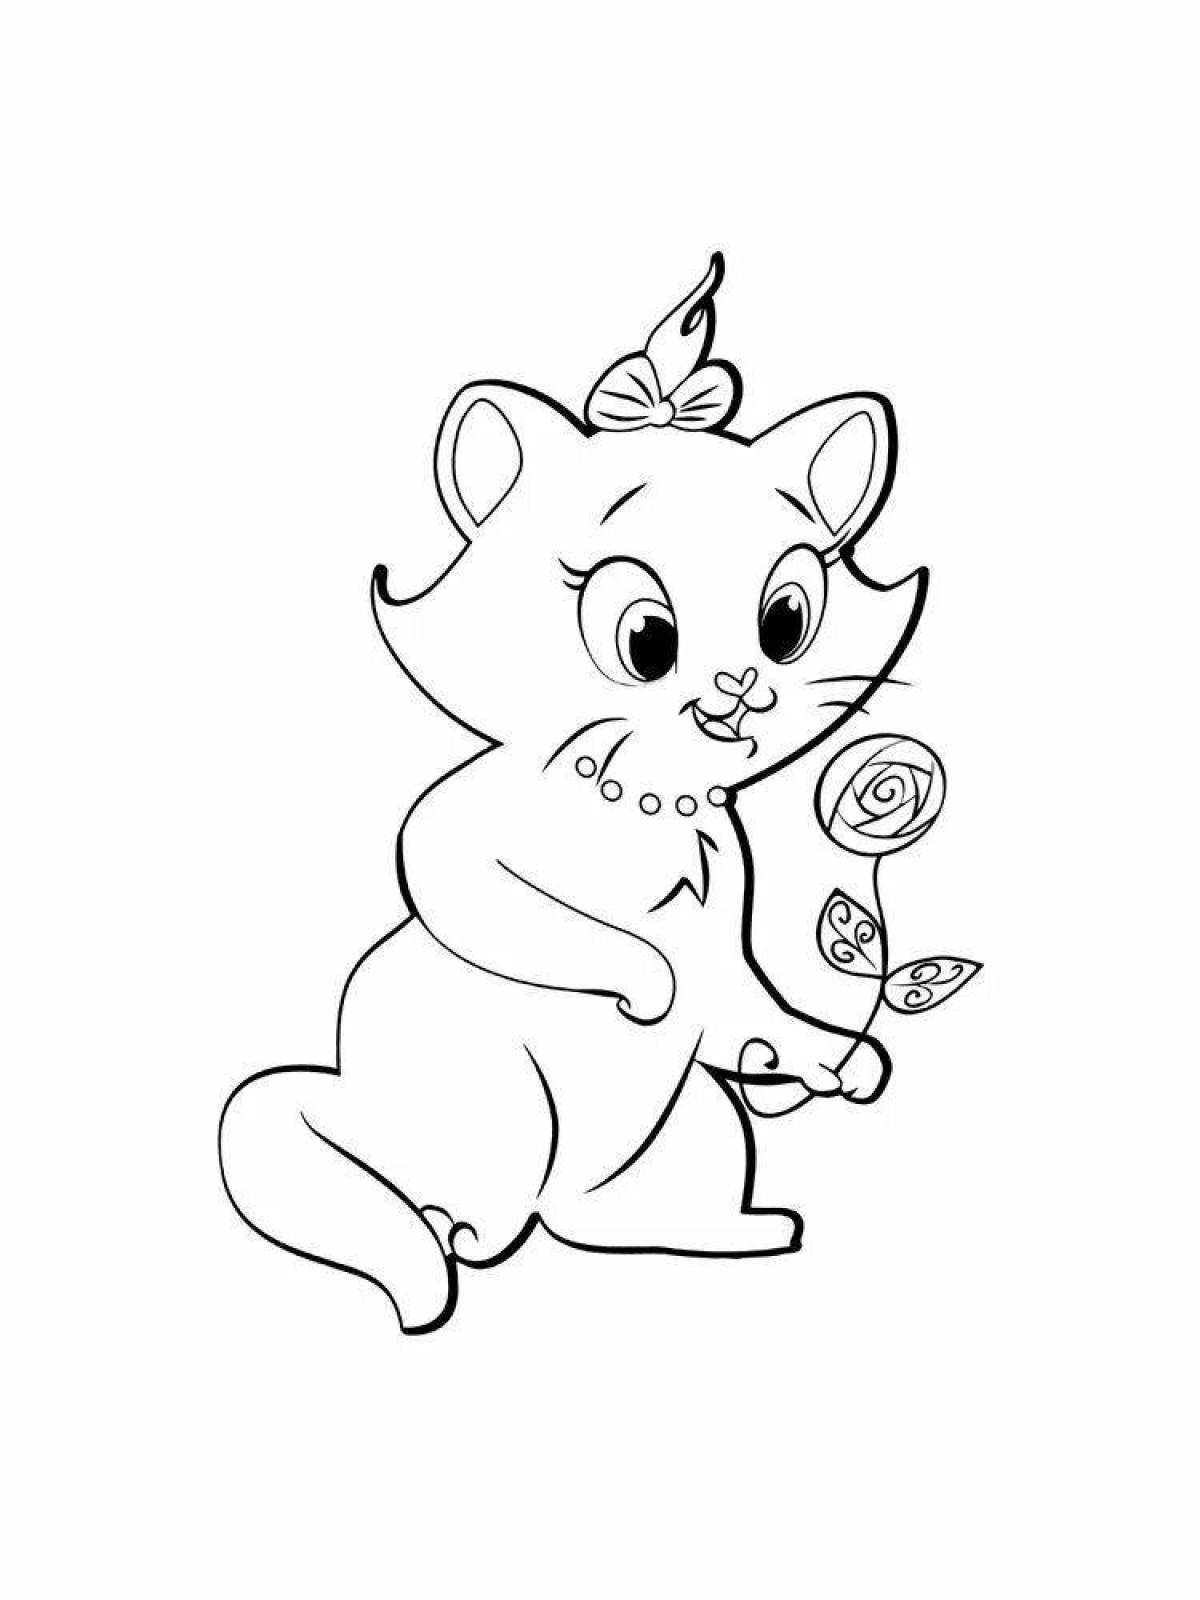 Quirky lily kitty coloring book